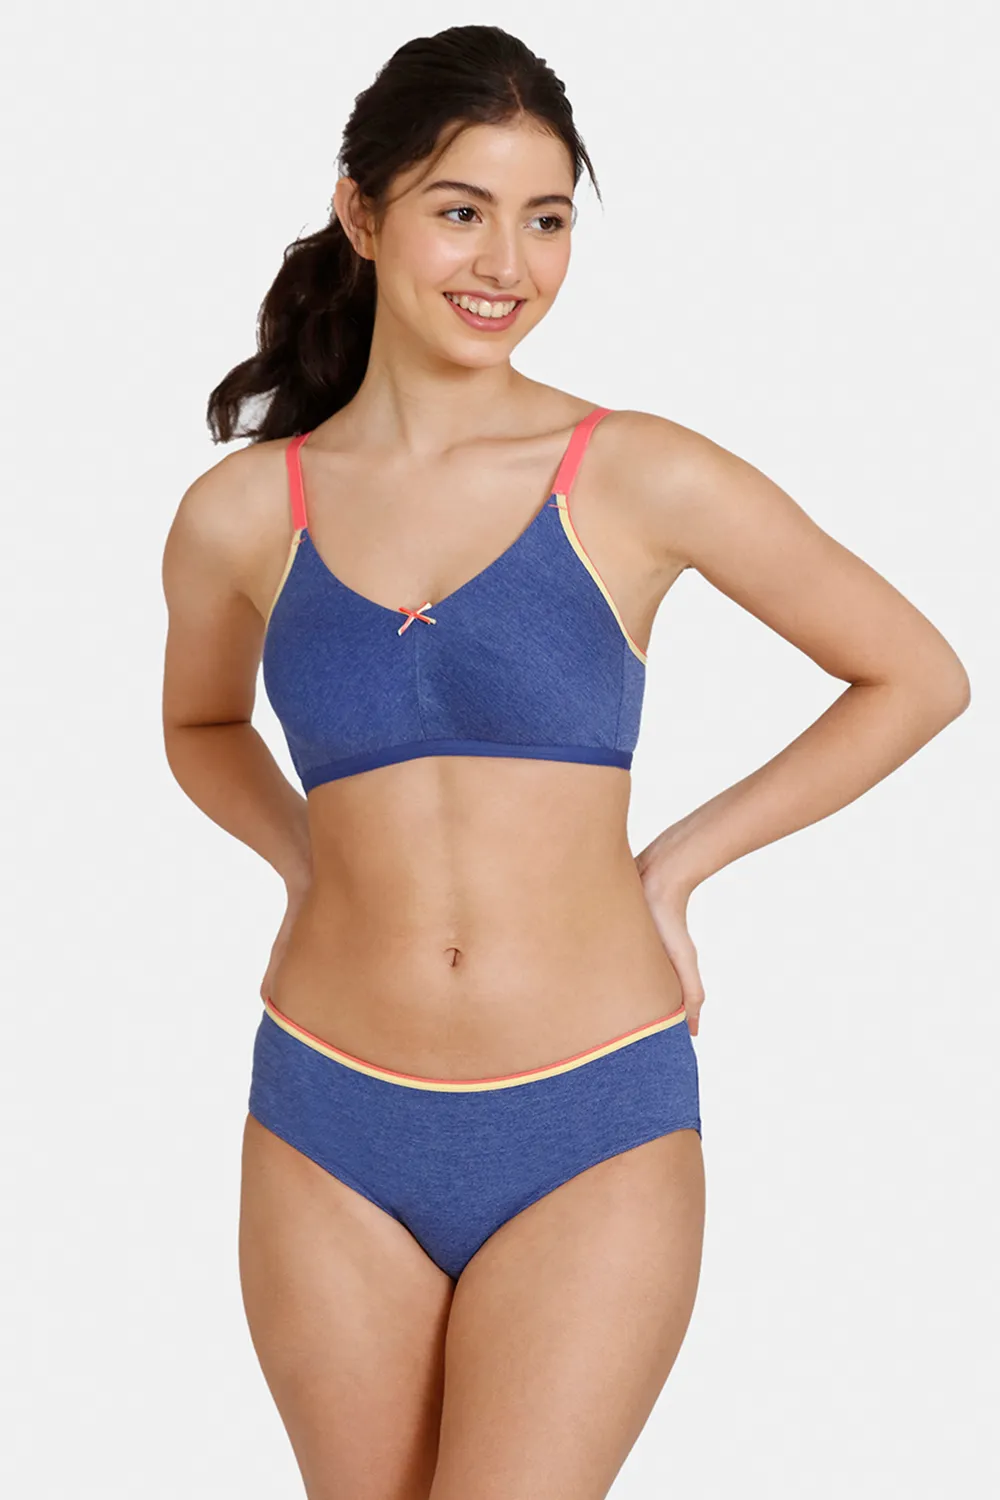 Ladies Girls Bra Panty Sets Undergarments at Rs 65/set, Bra and Brief Sets  in New Delhi